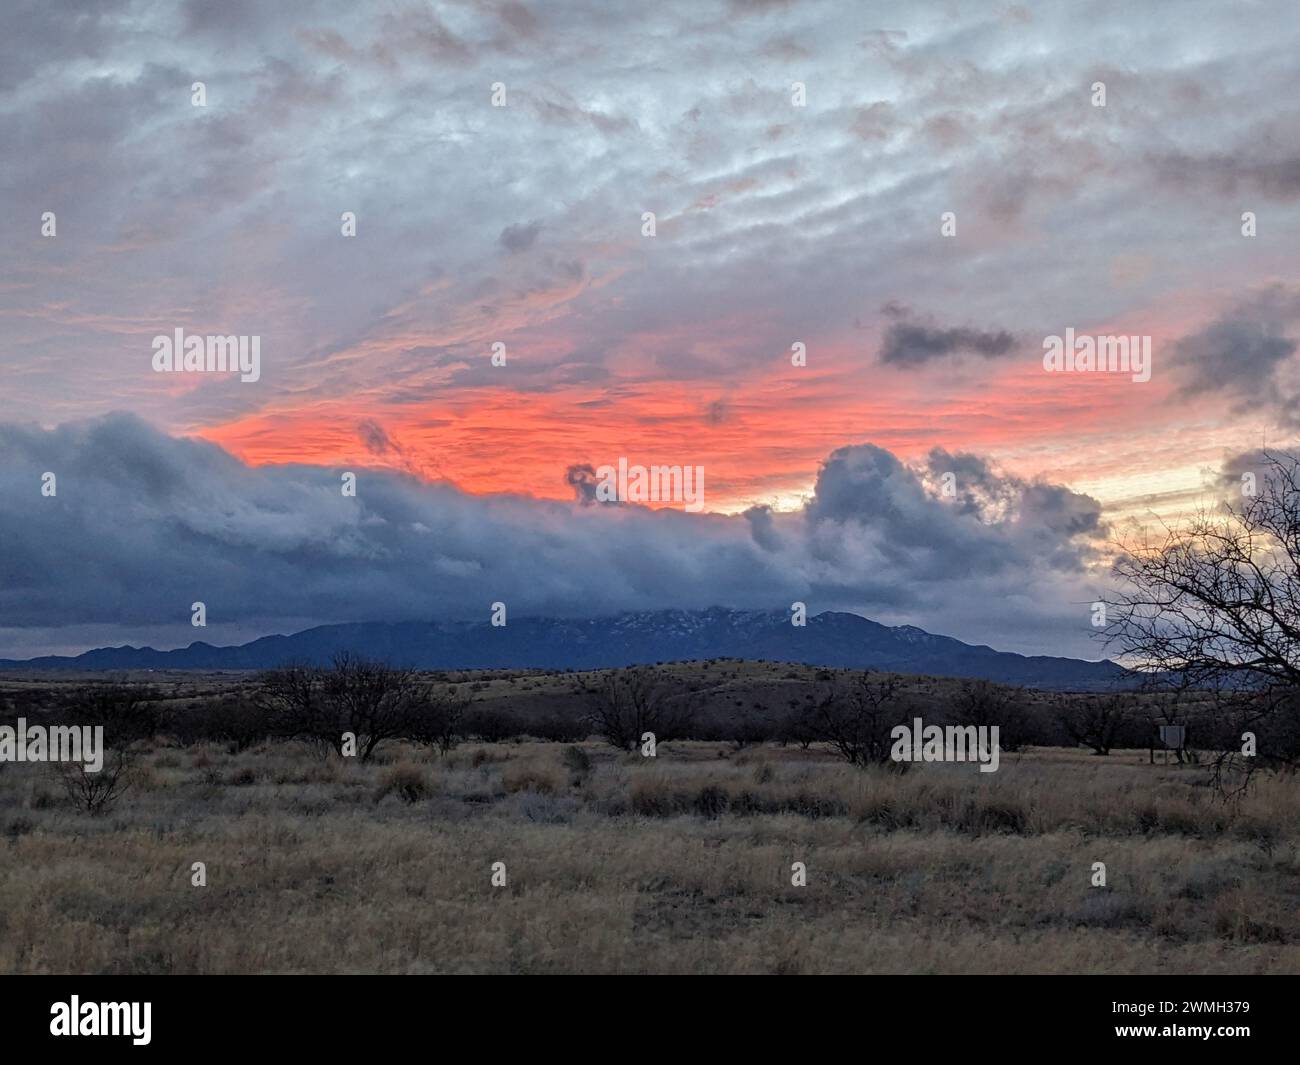 A Sunset over mountain with distant trees and clouds above Stock Photo